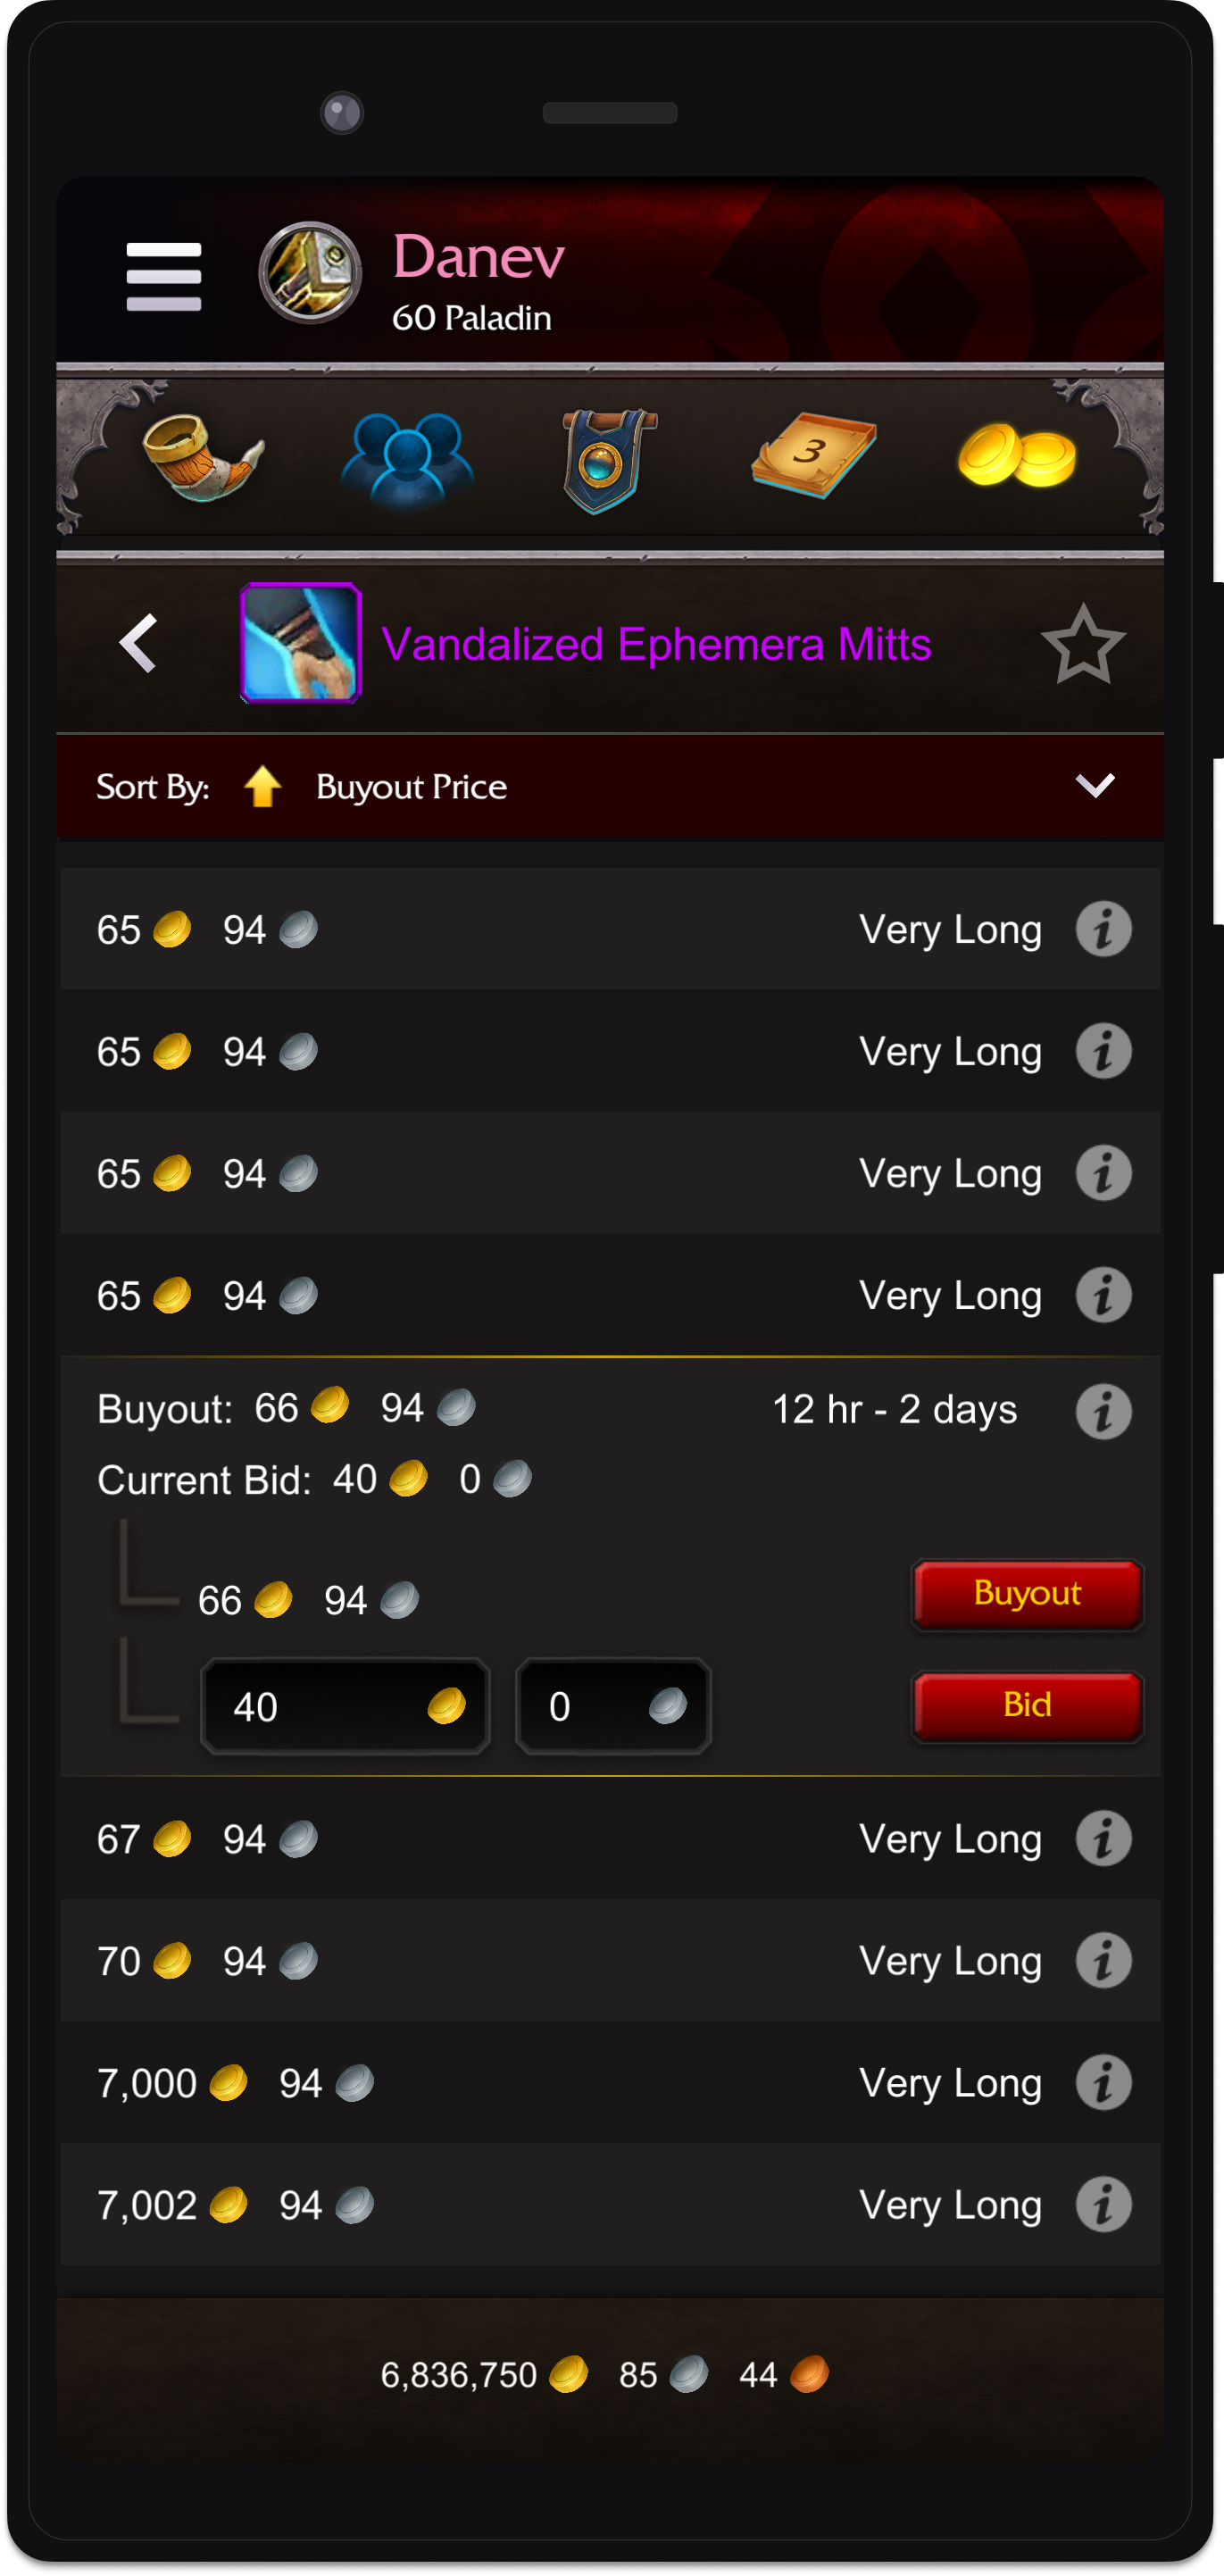 Auction House interface of placing a bid for an item.